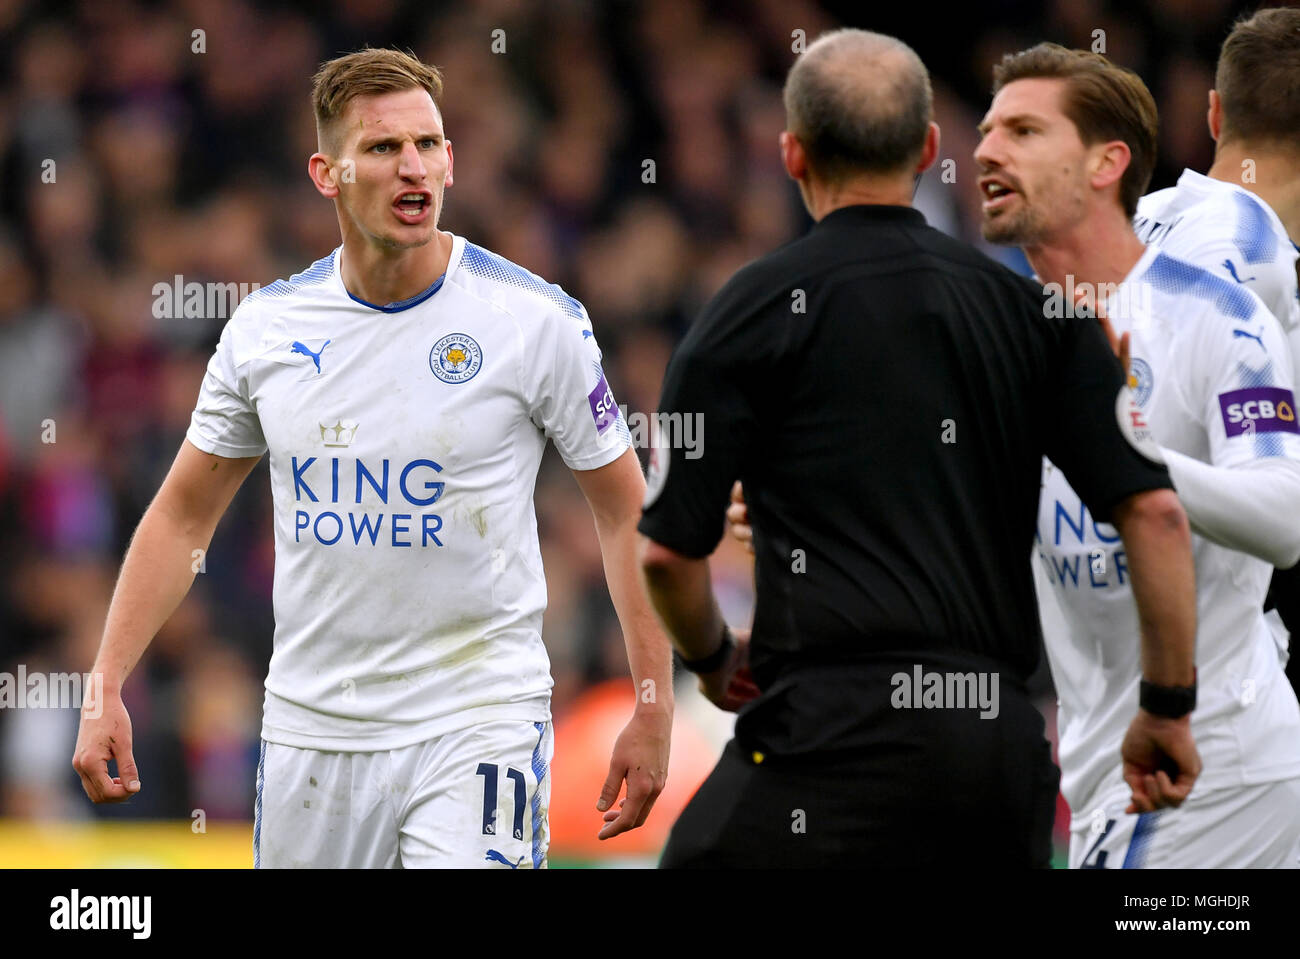 Leicester City's Marc Albrighton (left) reacts after receiving a red card from Referee Mike Dean during the Premier League match at Selhurst Park, London. Stock Photo